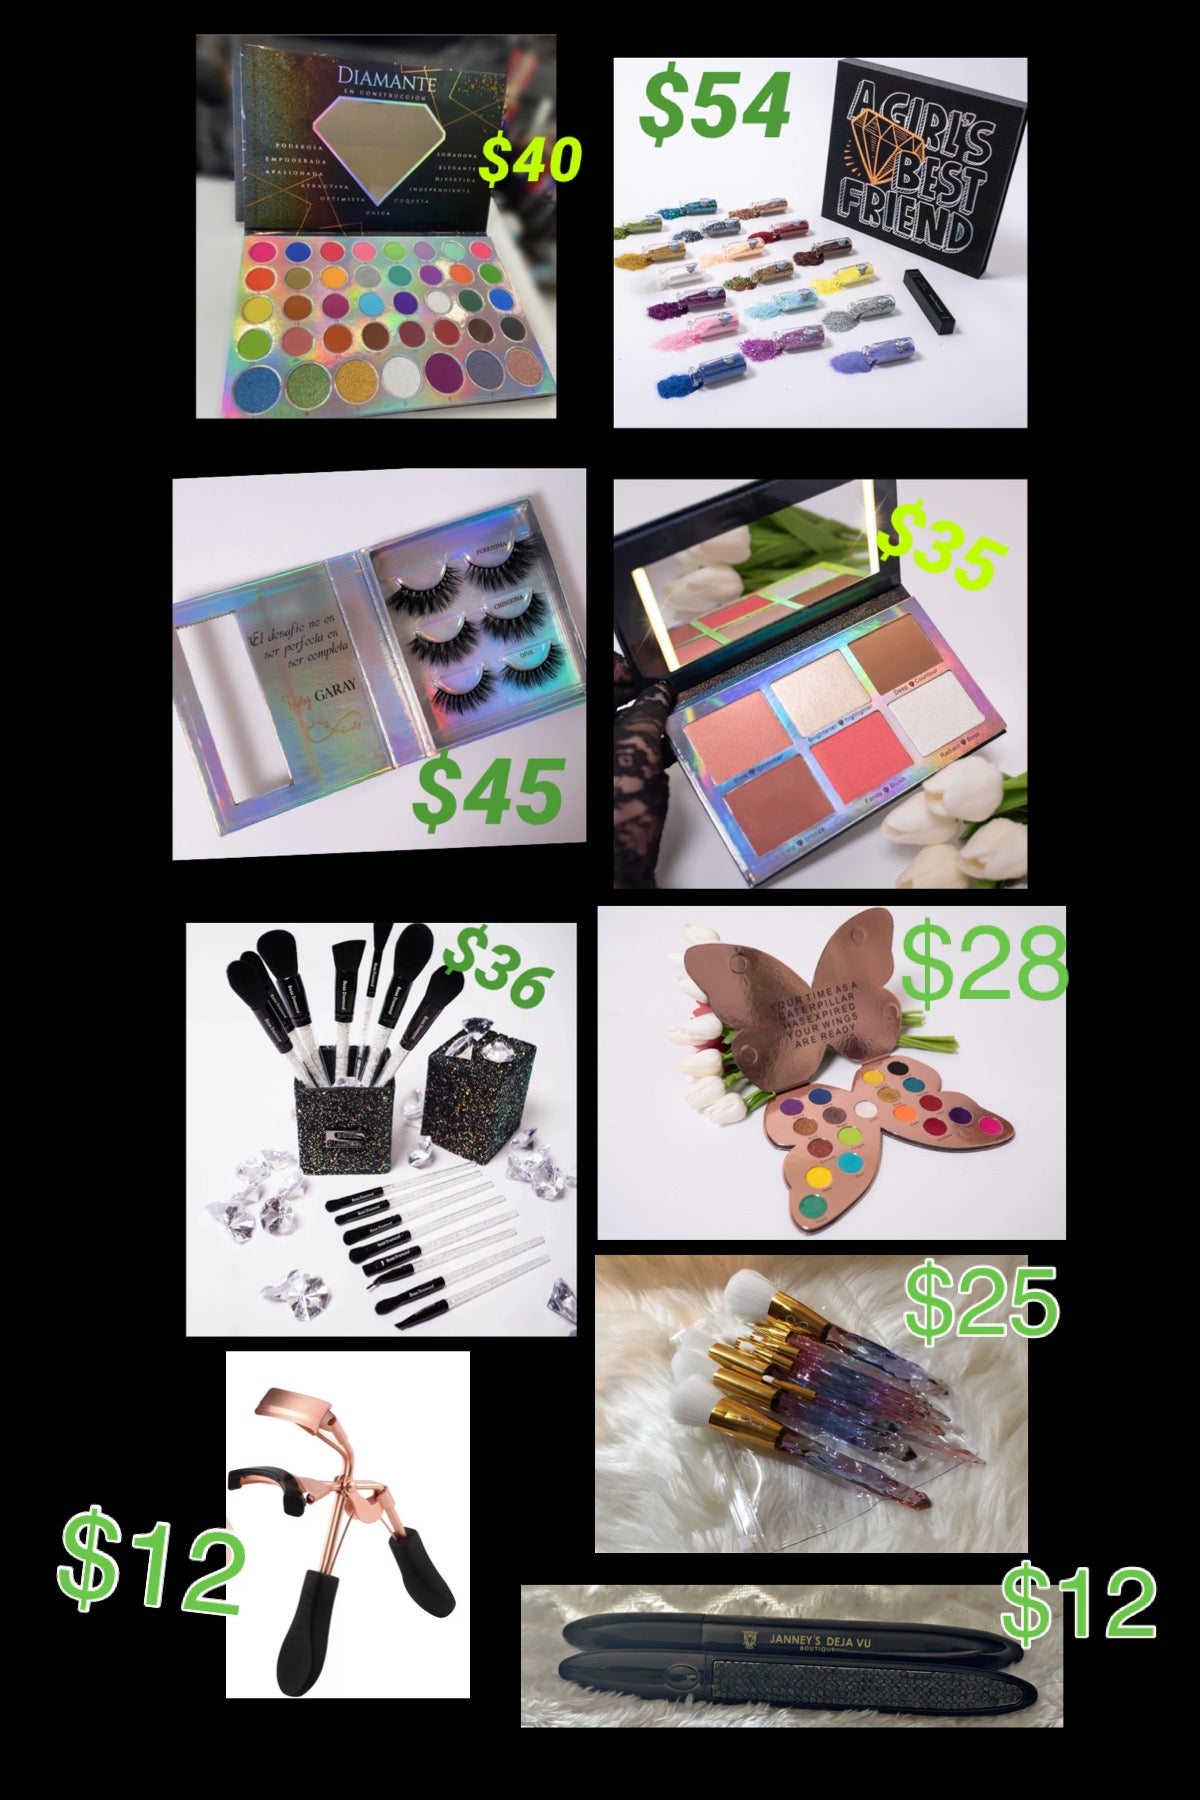 EVERYTHING IN PICTURE GET MARIPOSA PALETTE AND BRUSH SET FREE PURCHISING THE FULL COLLECTION